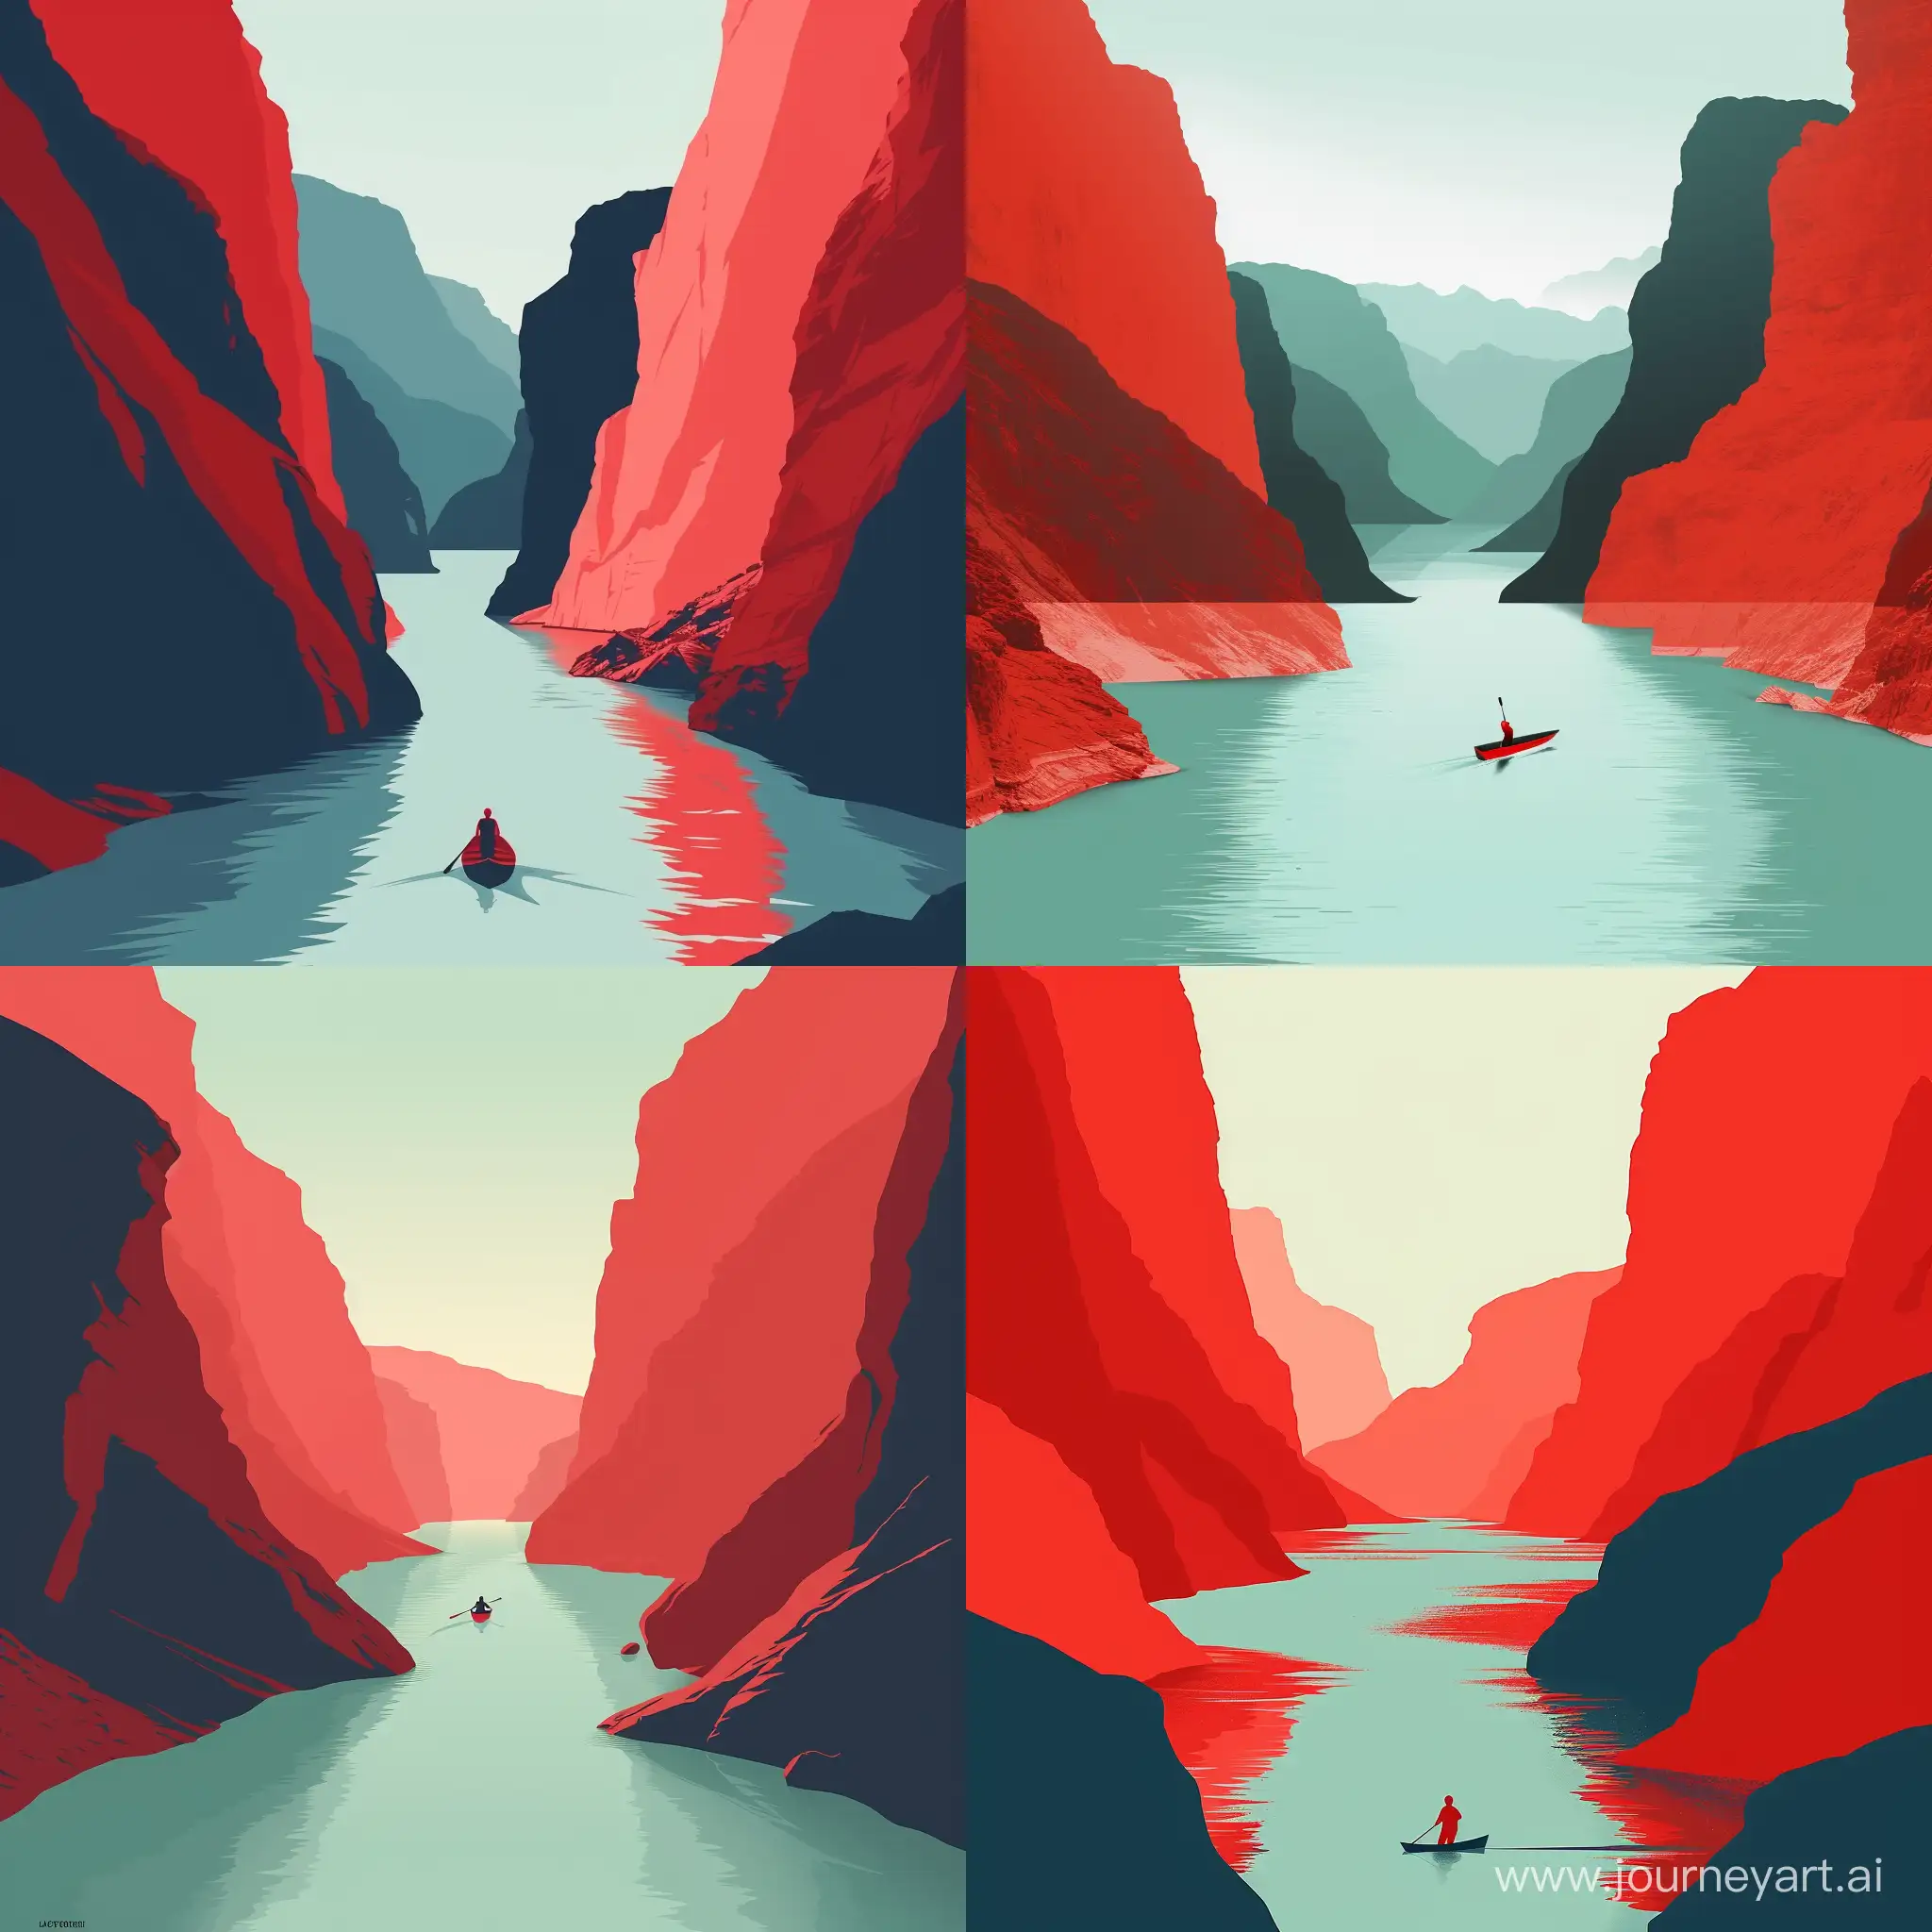 Serene-River-Boating-Amidst-Majestic-Mountains-Nature-Poster-Design